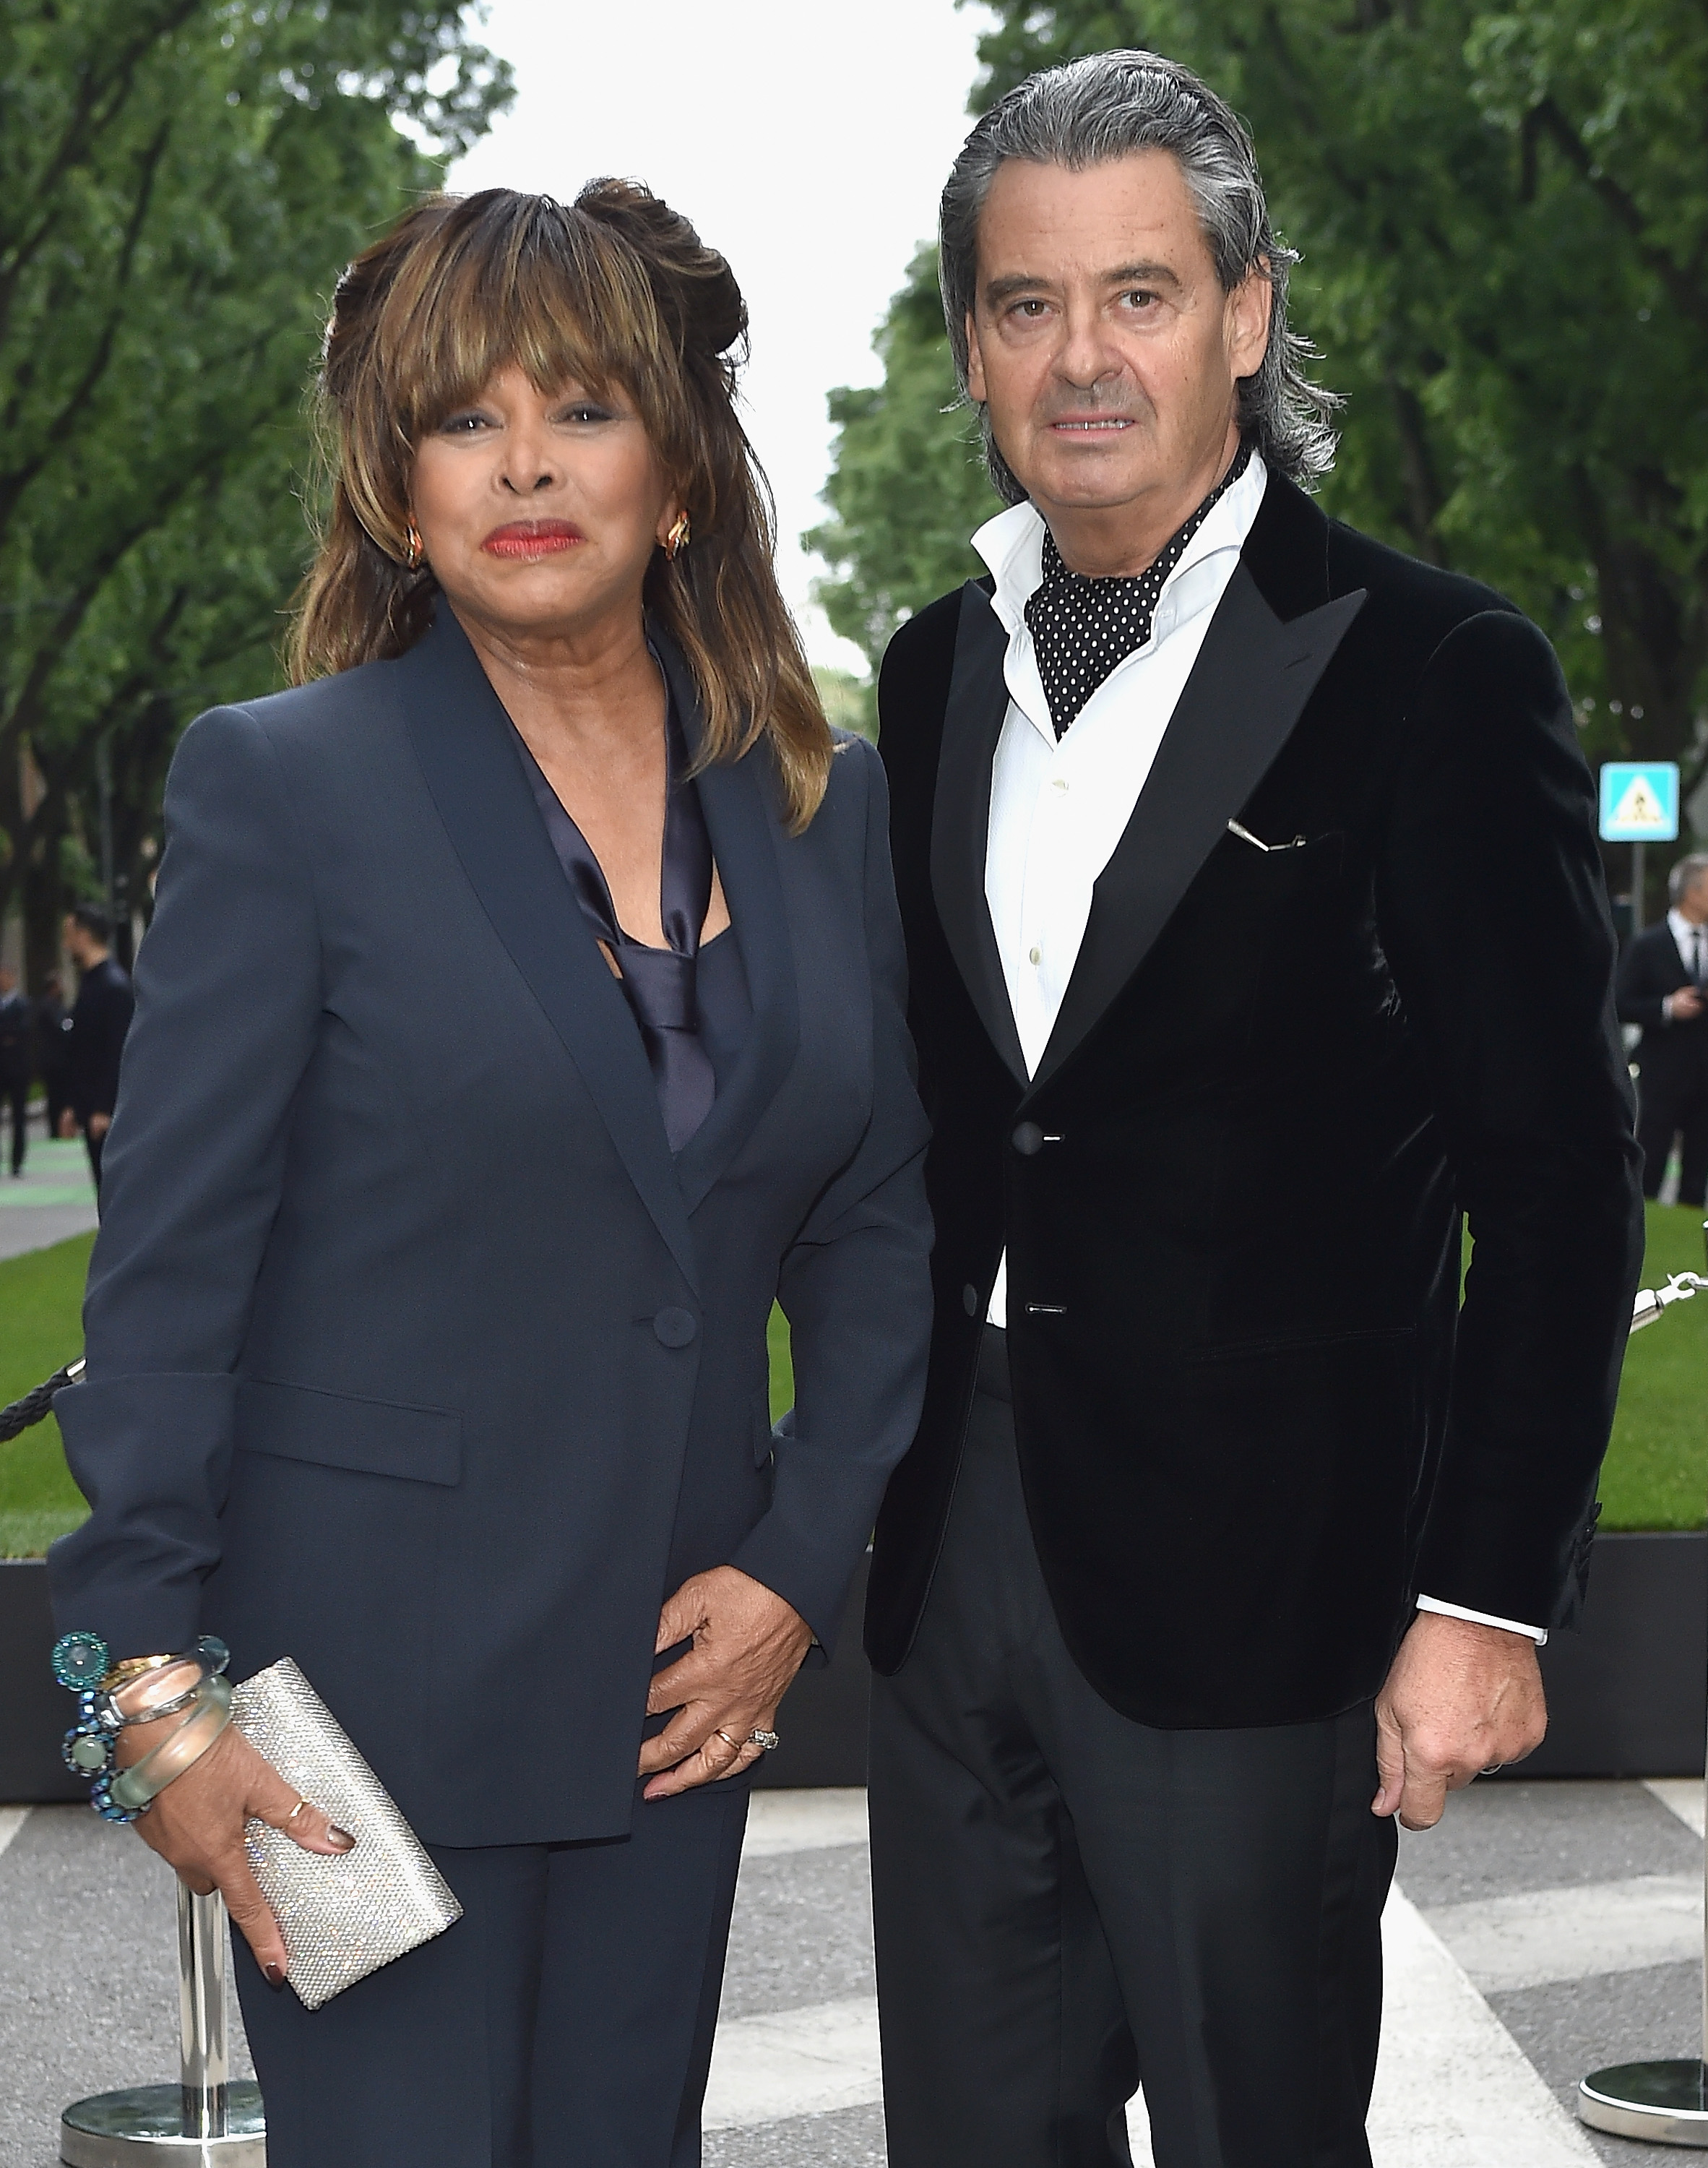 Tina turner e Erwin Bach (Getty Images)